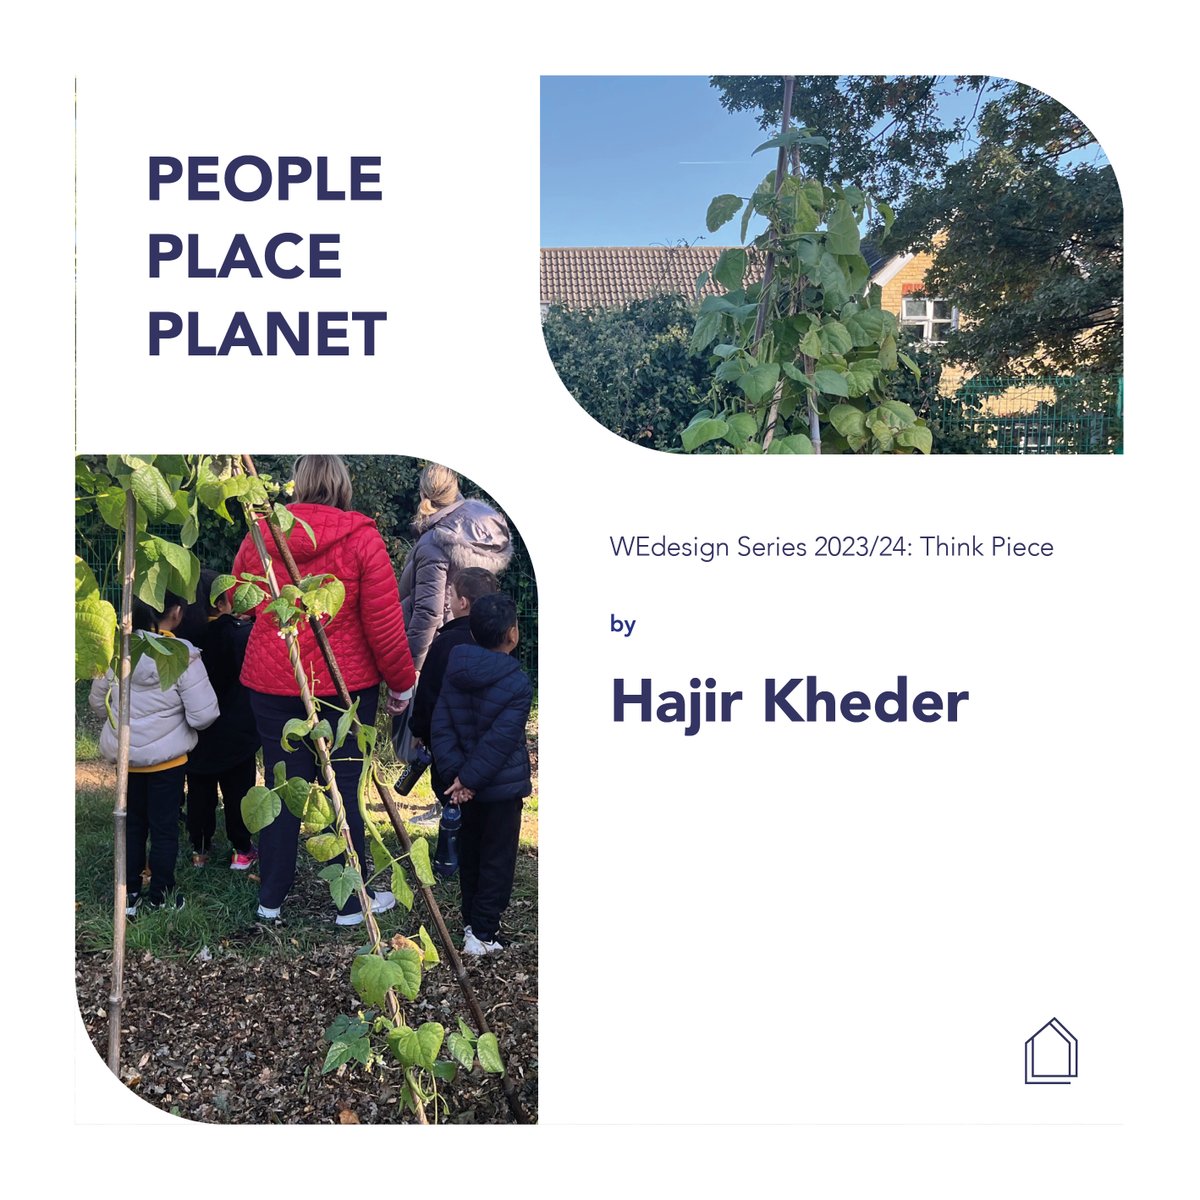 In this edition of our People, Place, Planet: Think Pieces, Hajir Kheder from Karakusevic Carson Architects explores the theme of People, Place, Planet through the lens of social value and collaboration. Follow the link below theglasshouse.org.uk/blog-series/ev… #WEdesign